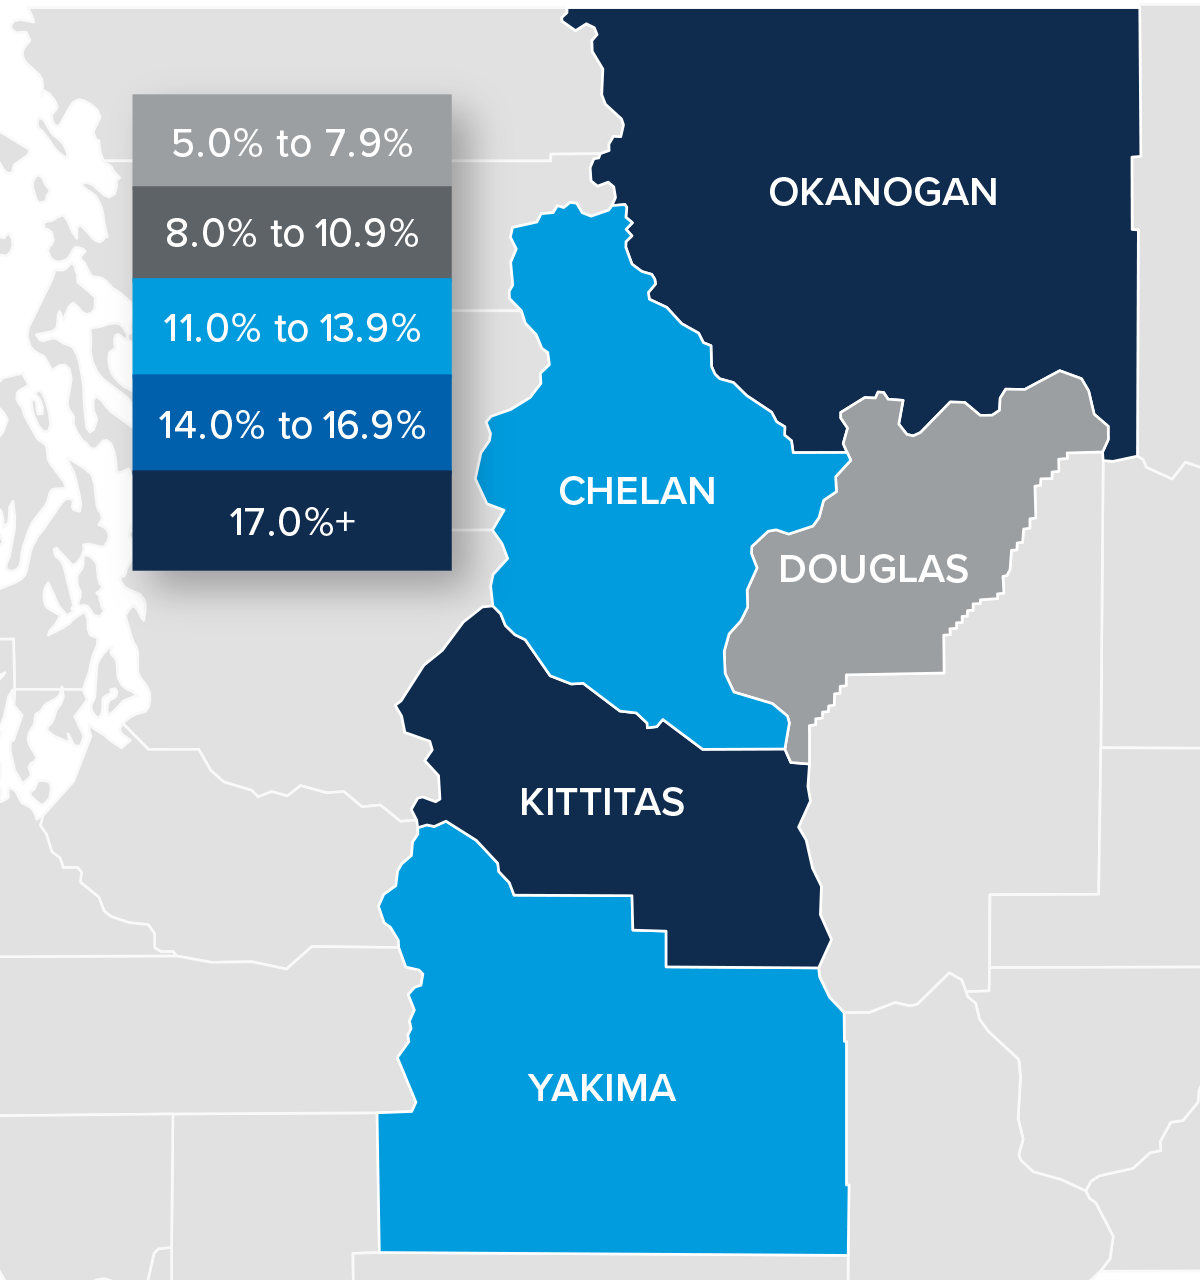 A map showing the real estate home prices percentage changes for various counties in Central Washington. Different colors correspond to different tiers of percentage change. Douglas County is the only county with a percentage change in the 5% to 7.9% range, while Chelan and Yakima are in the 11% to 13.9% change range. Okanogan and Kittitas Counties are in the 17% + change range.